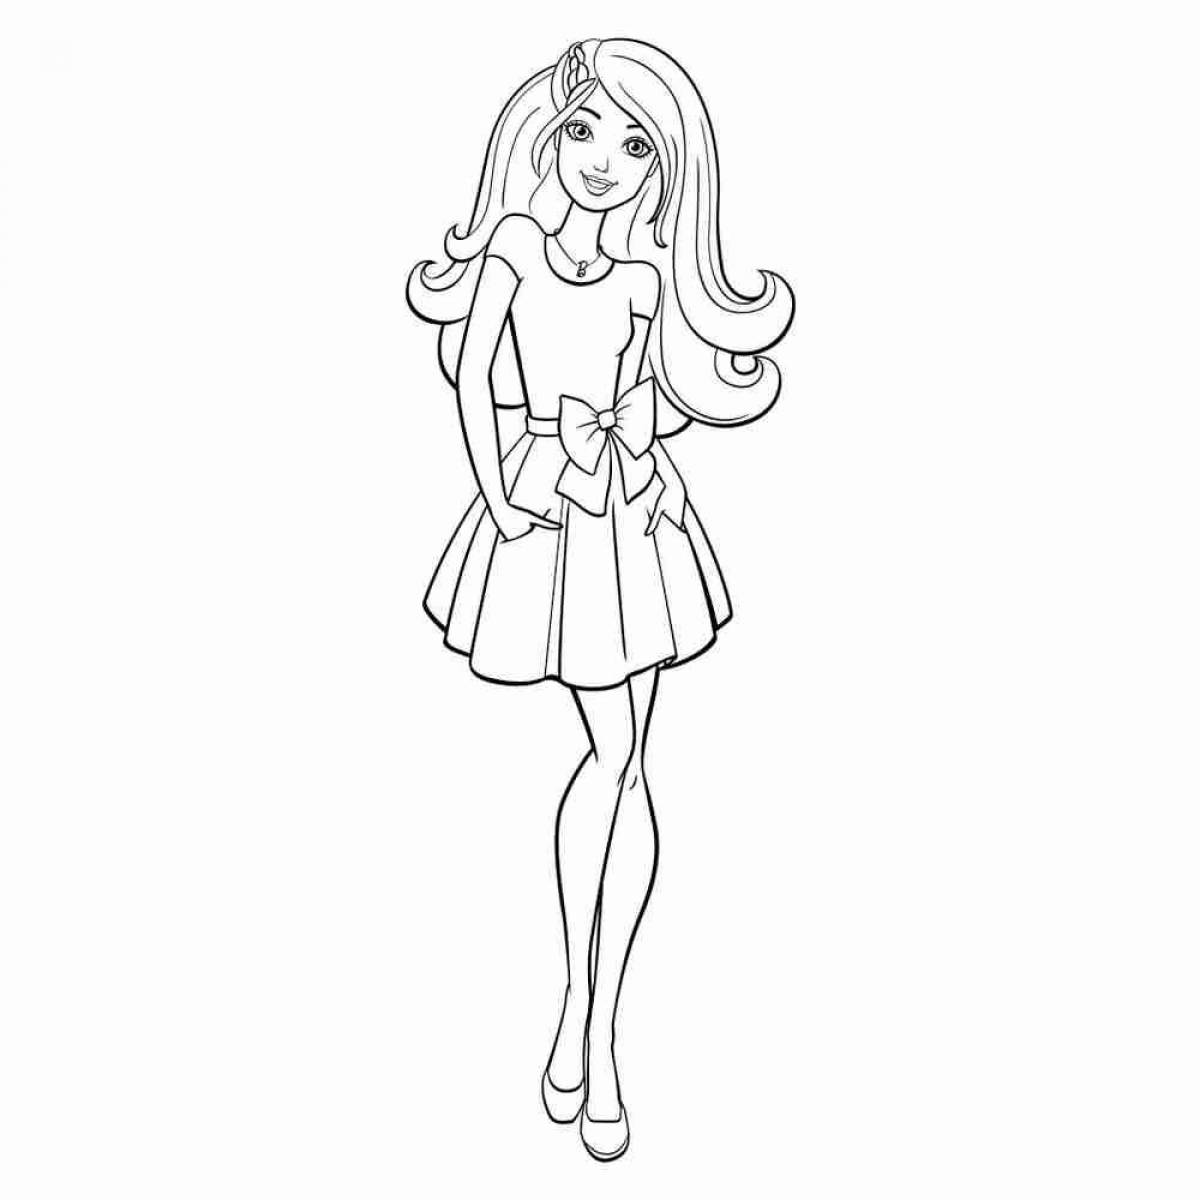 Gorgeous barbie doll coloring page